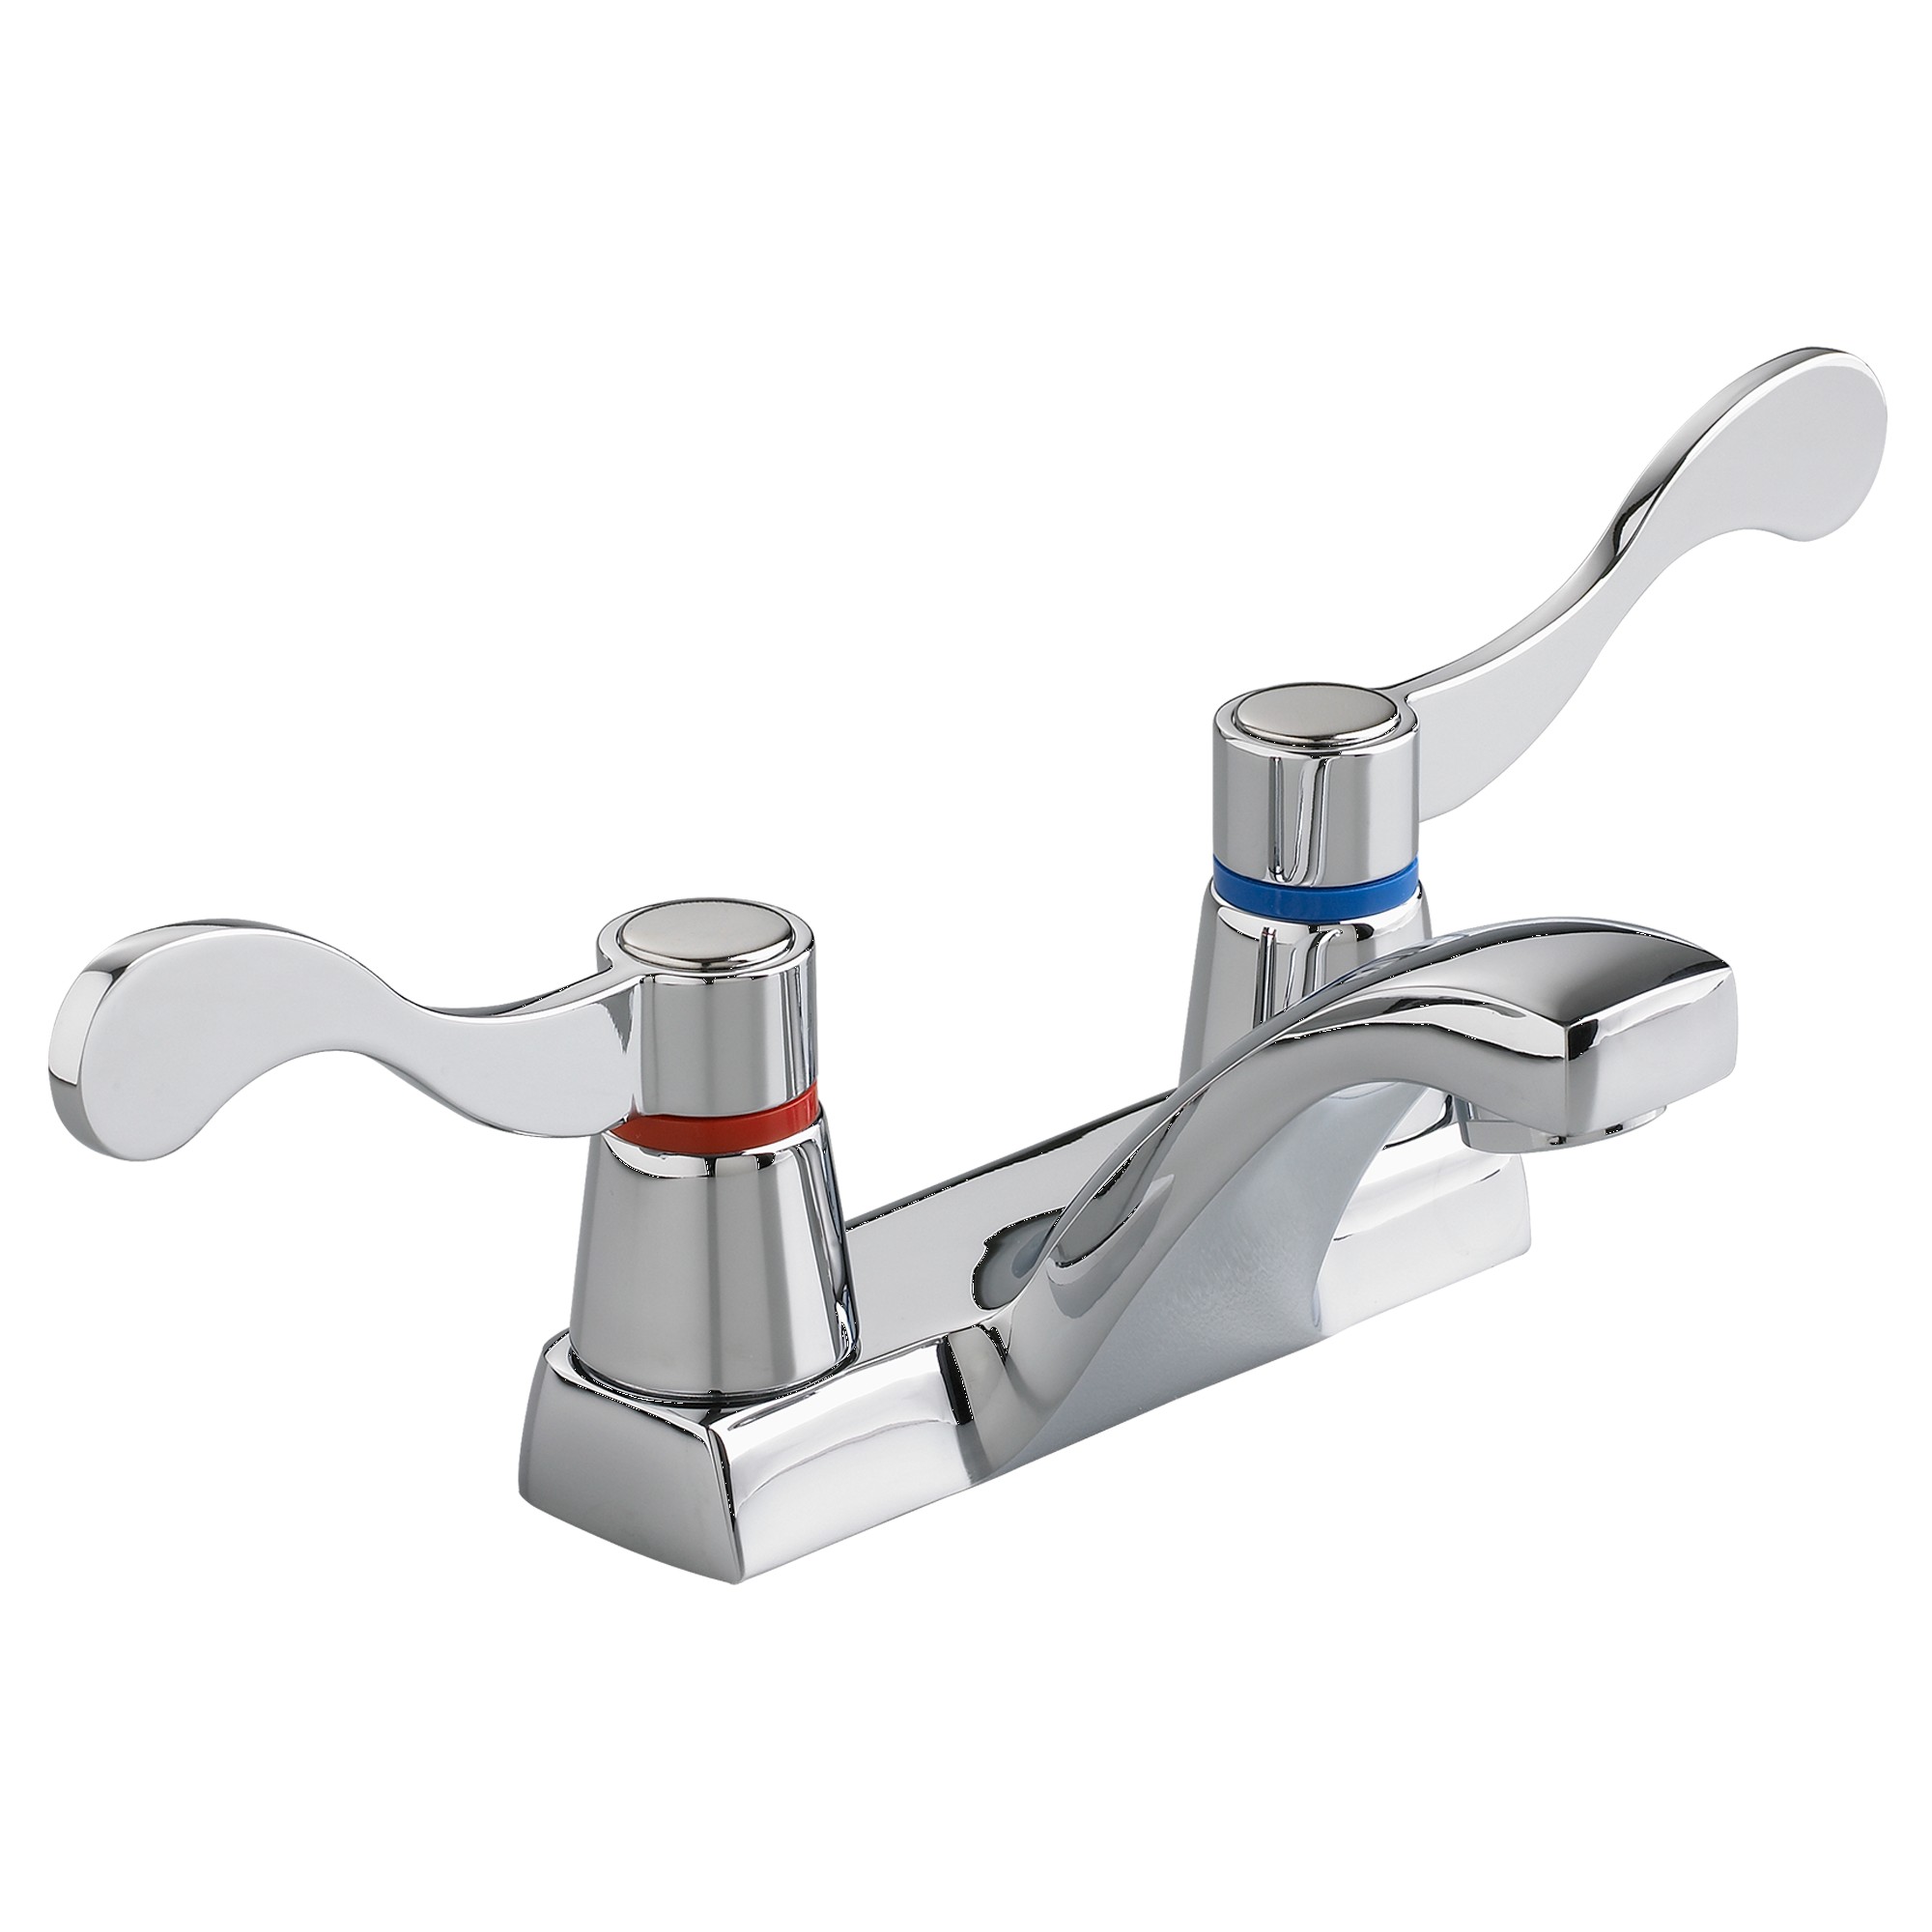 American Standard | 5400.172H.002 | *AMERICAN STANDARD 5400.172H HERITAGE CENTERSET LAVATORY FAUCET WITH WRIST BLADE HANDLES LESS DRAIN CP 002 CHROME